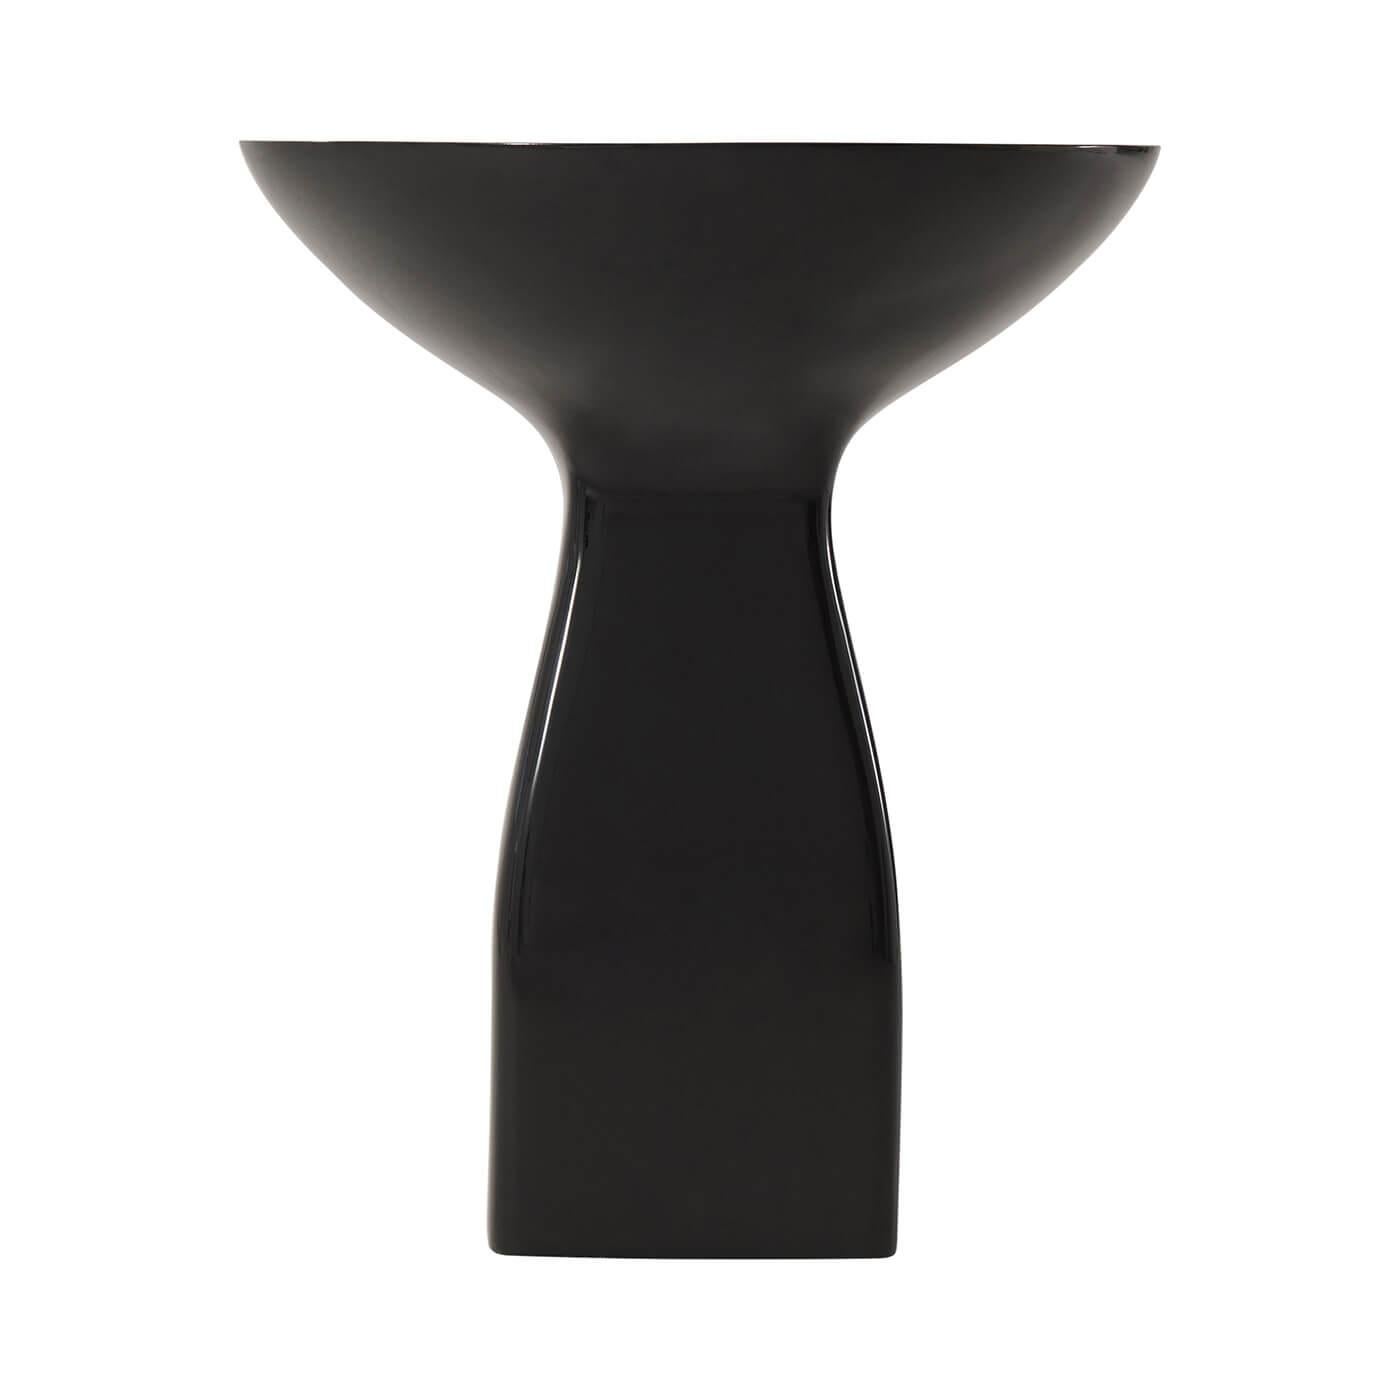 Vietnamese Modern Lacquered Pedestal Table For Sale